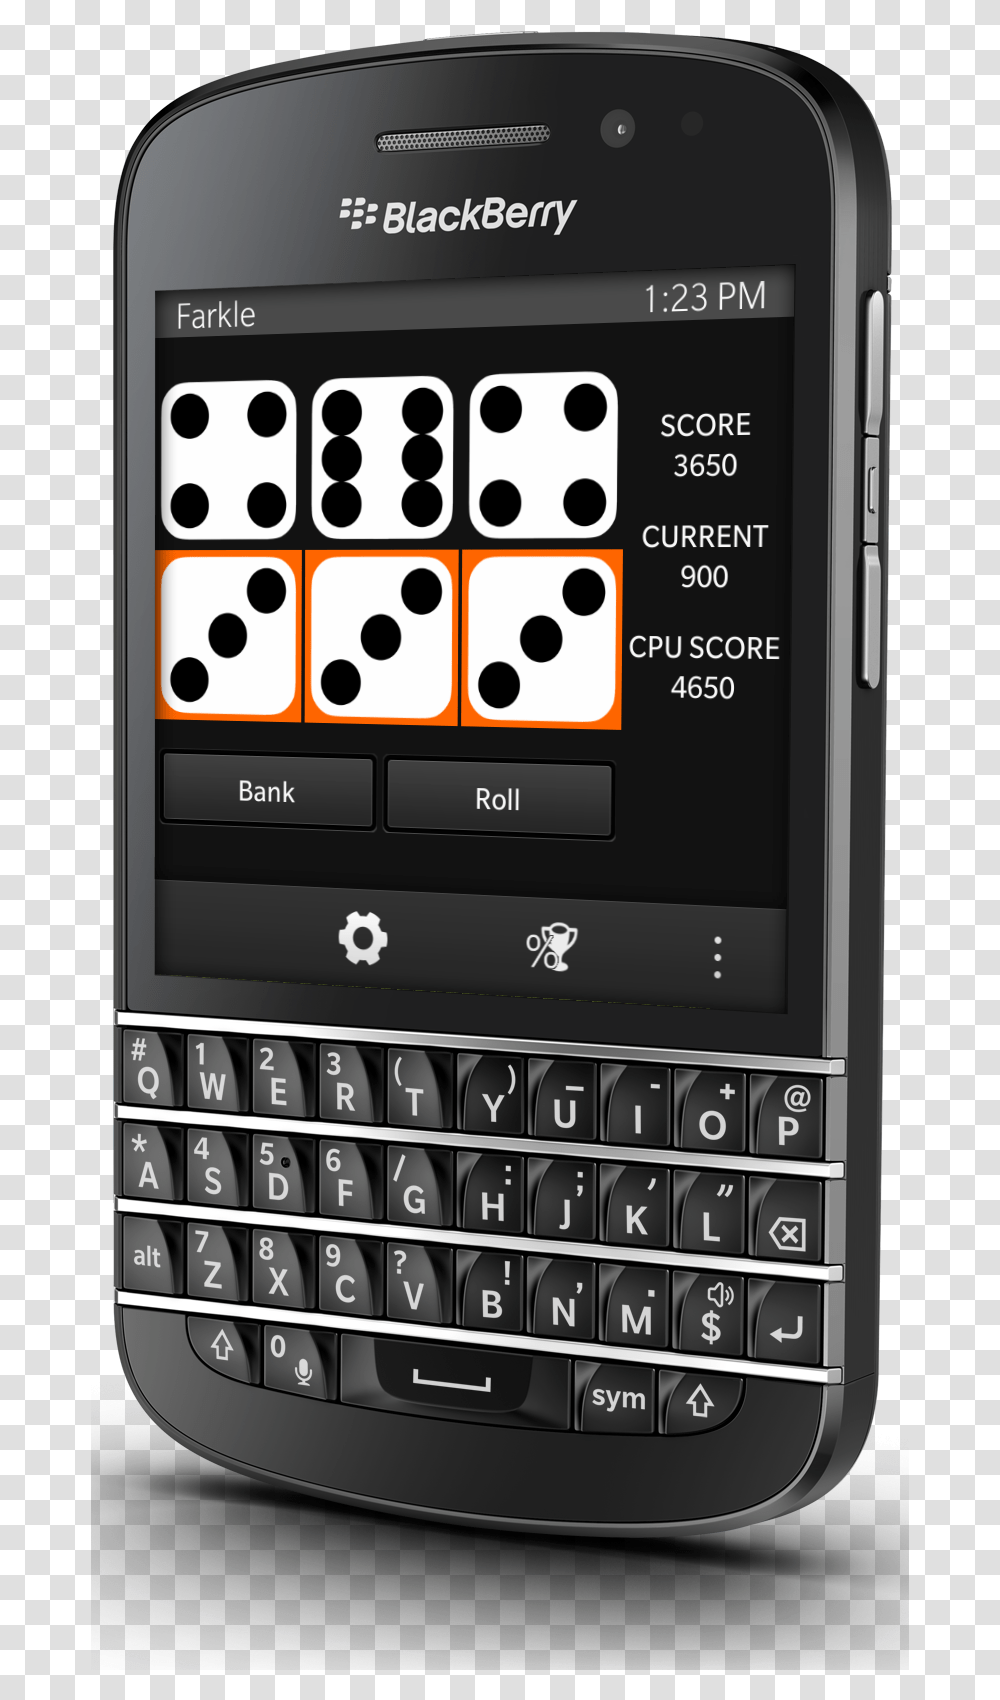 Farkle Updated For Blackberry 10 Blackberry Phone, Mobile Phone, Electronics, Cell Phone, Computer Keyboard Transparent Png